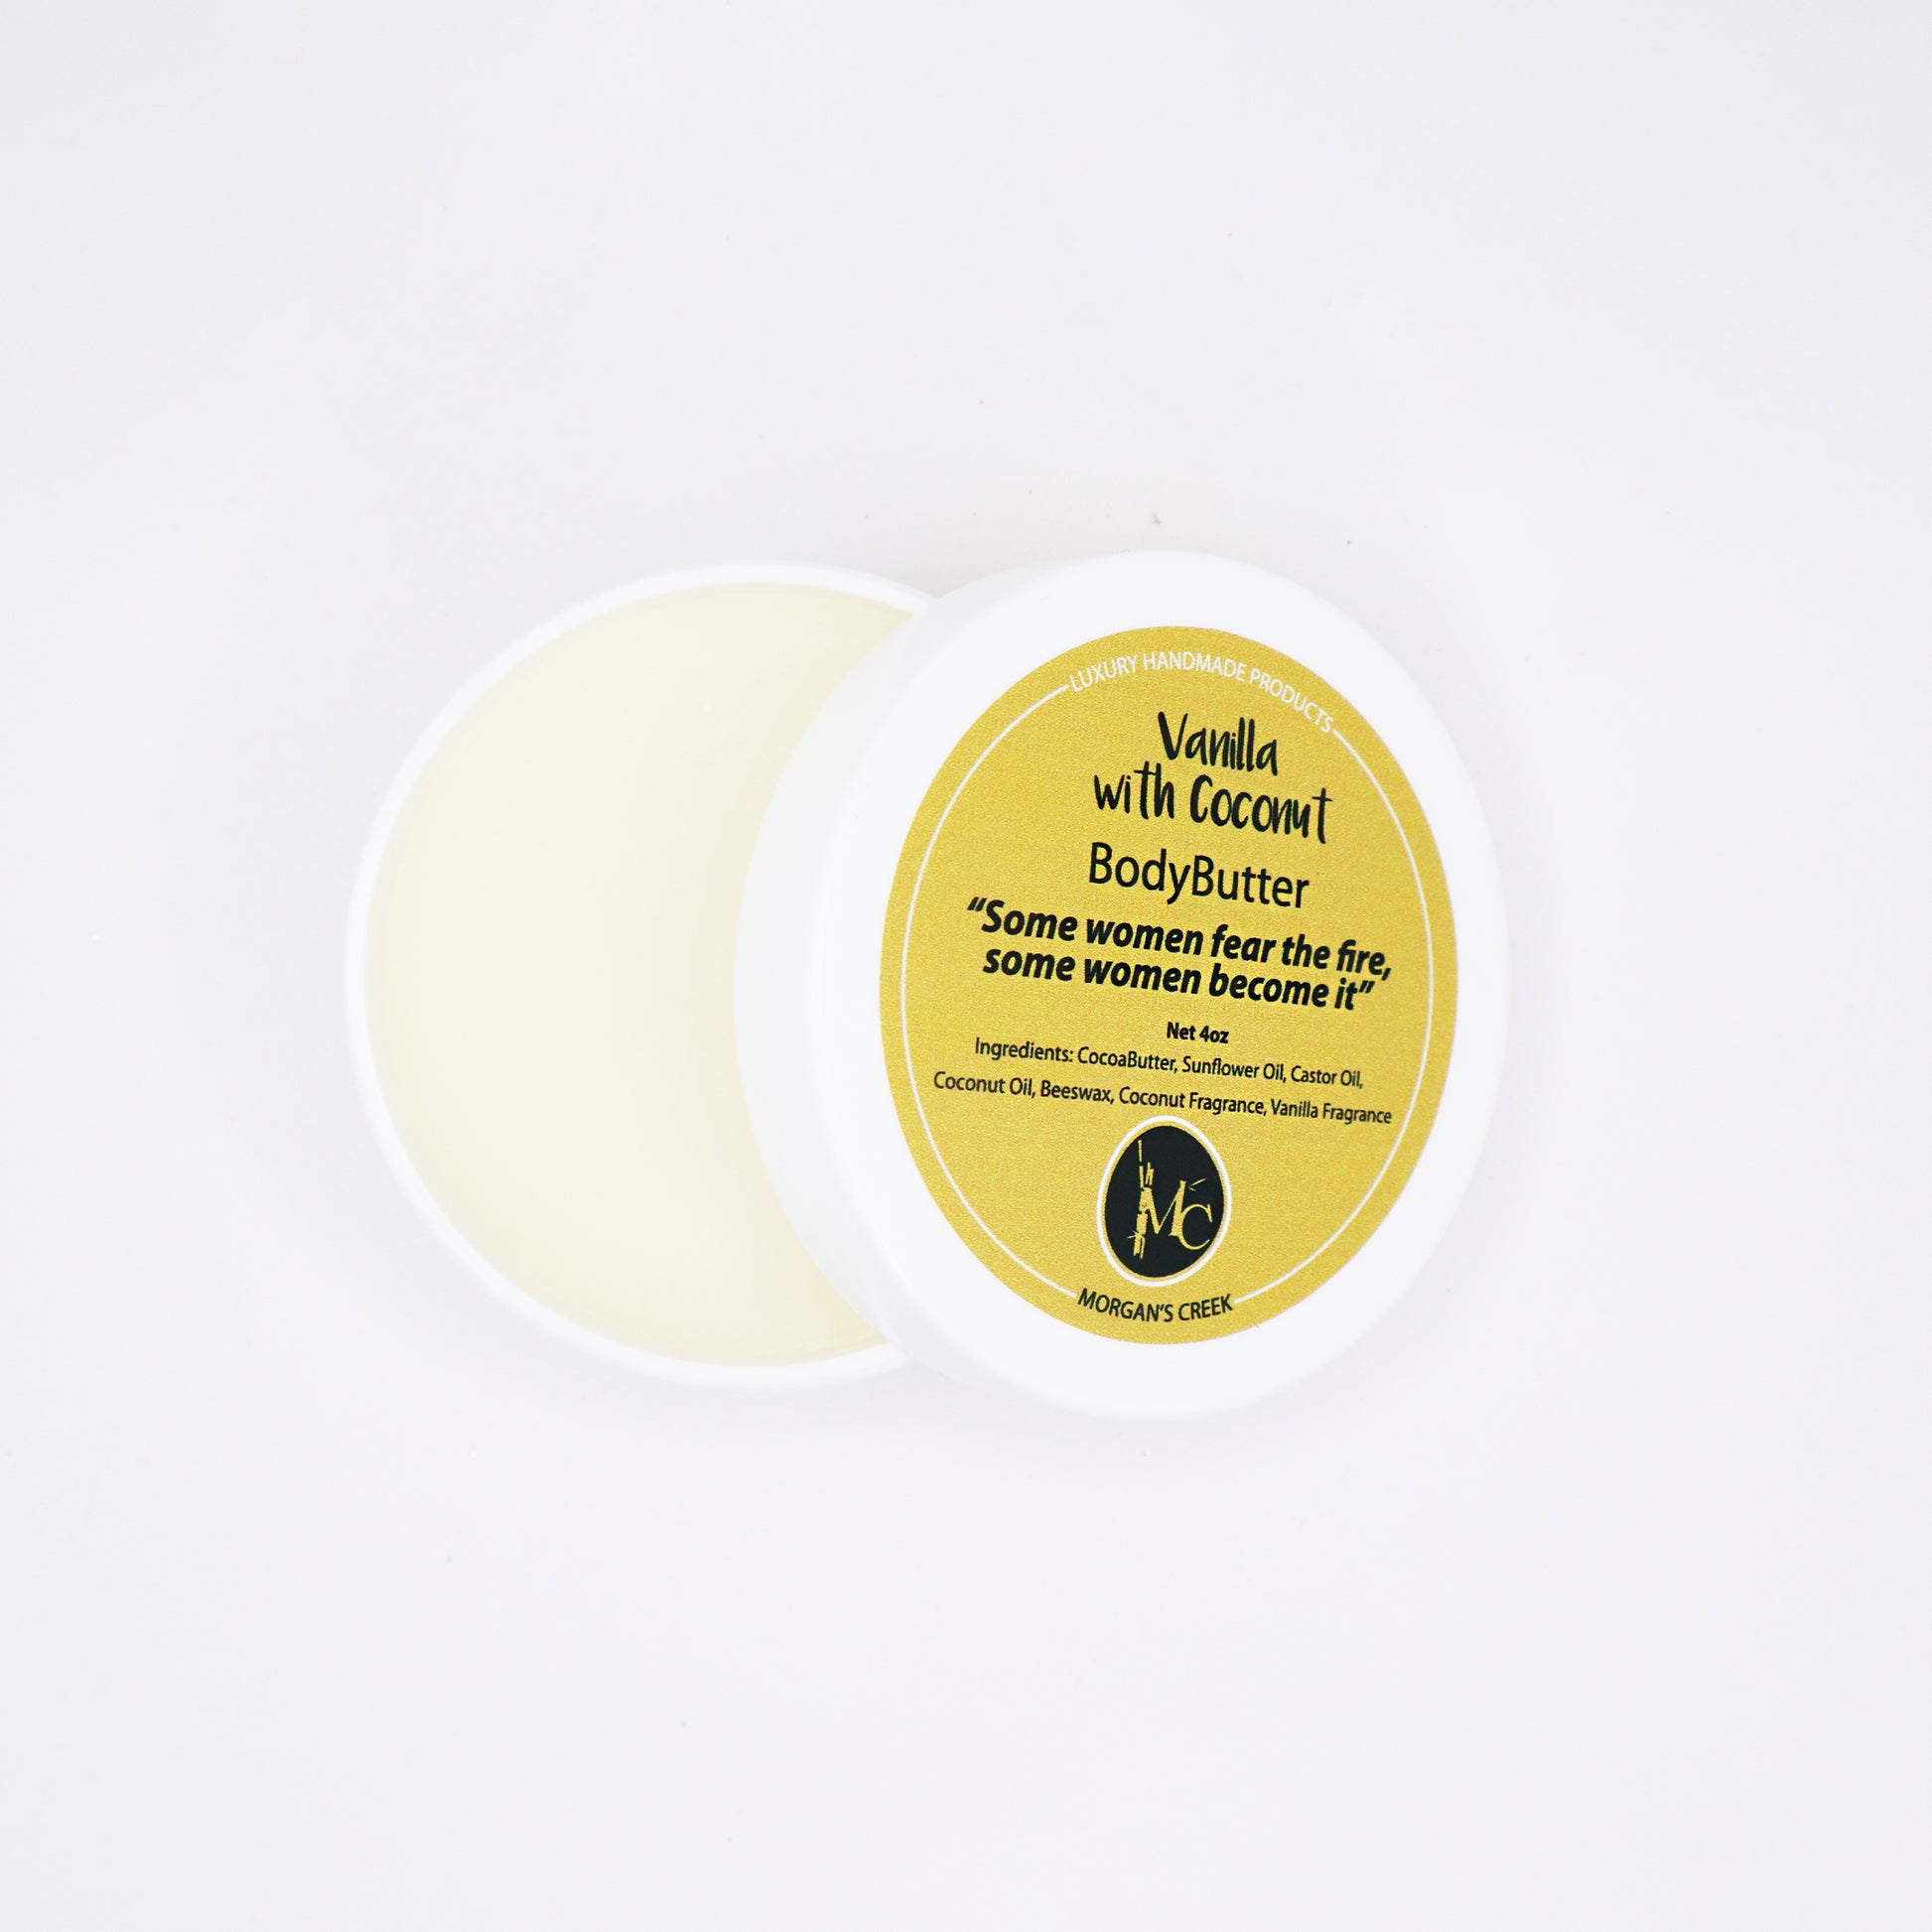 Vanilla with Coconut Body Butter by Morgan's Creek